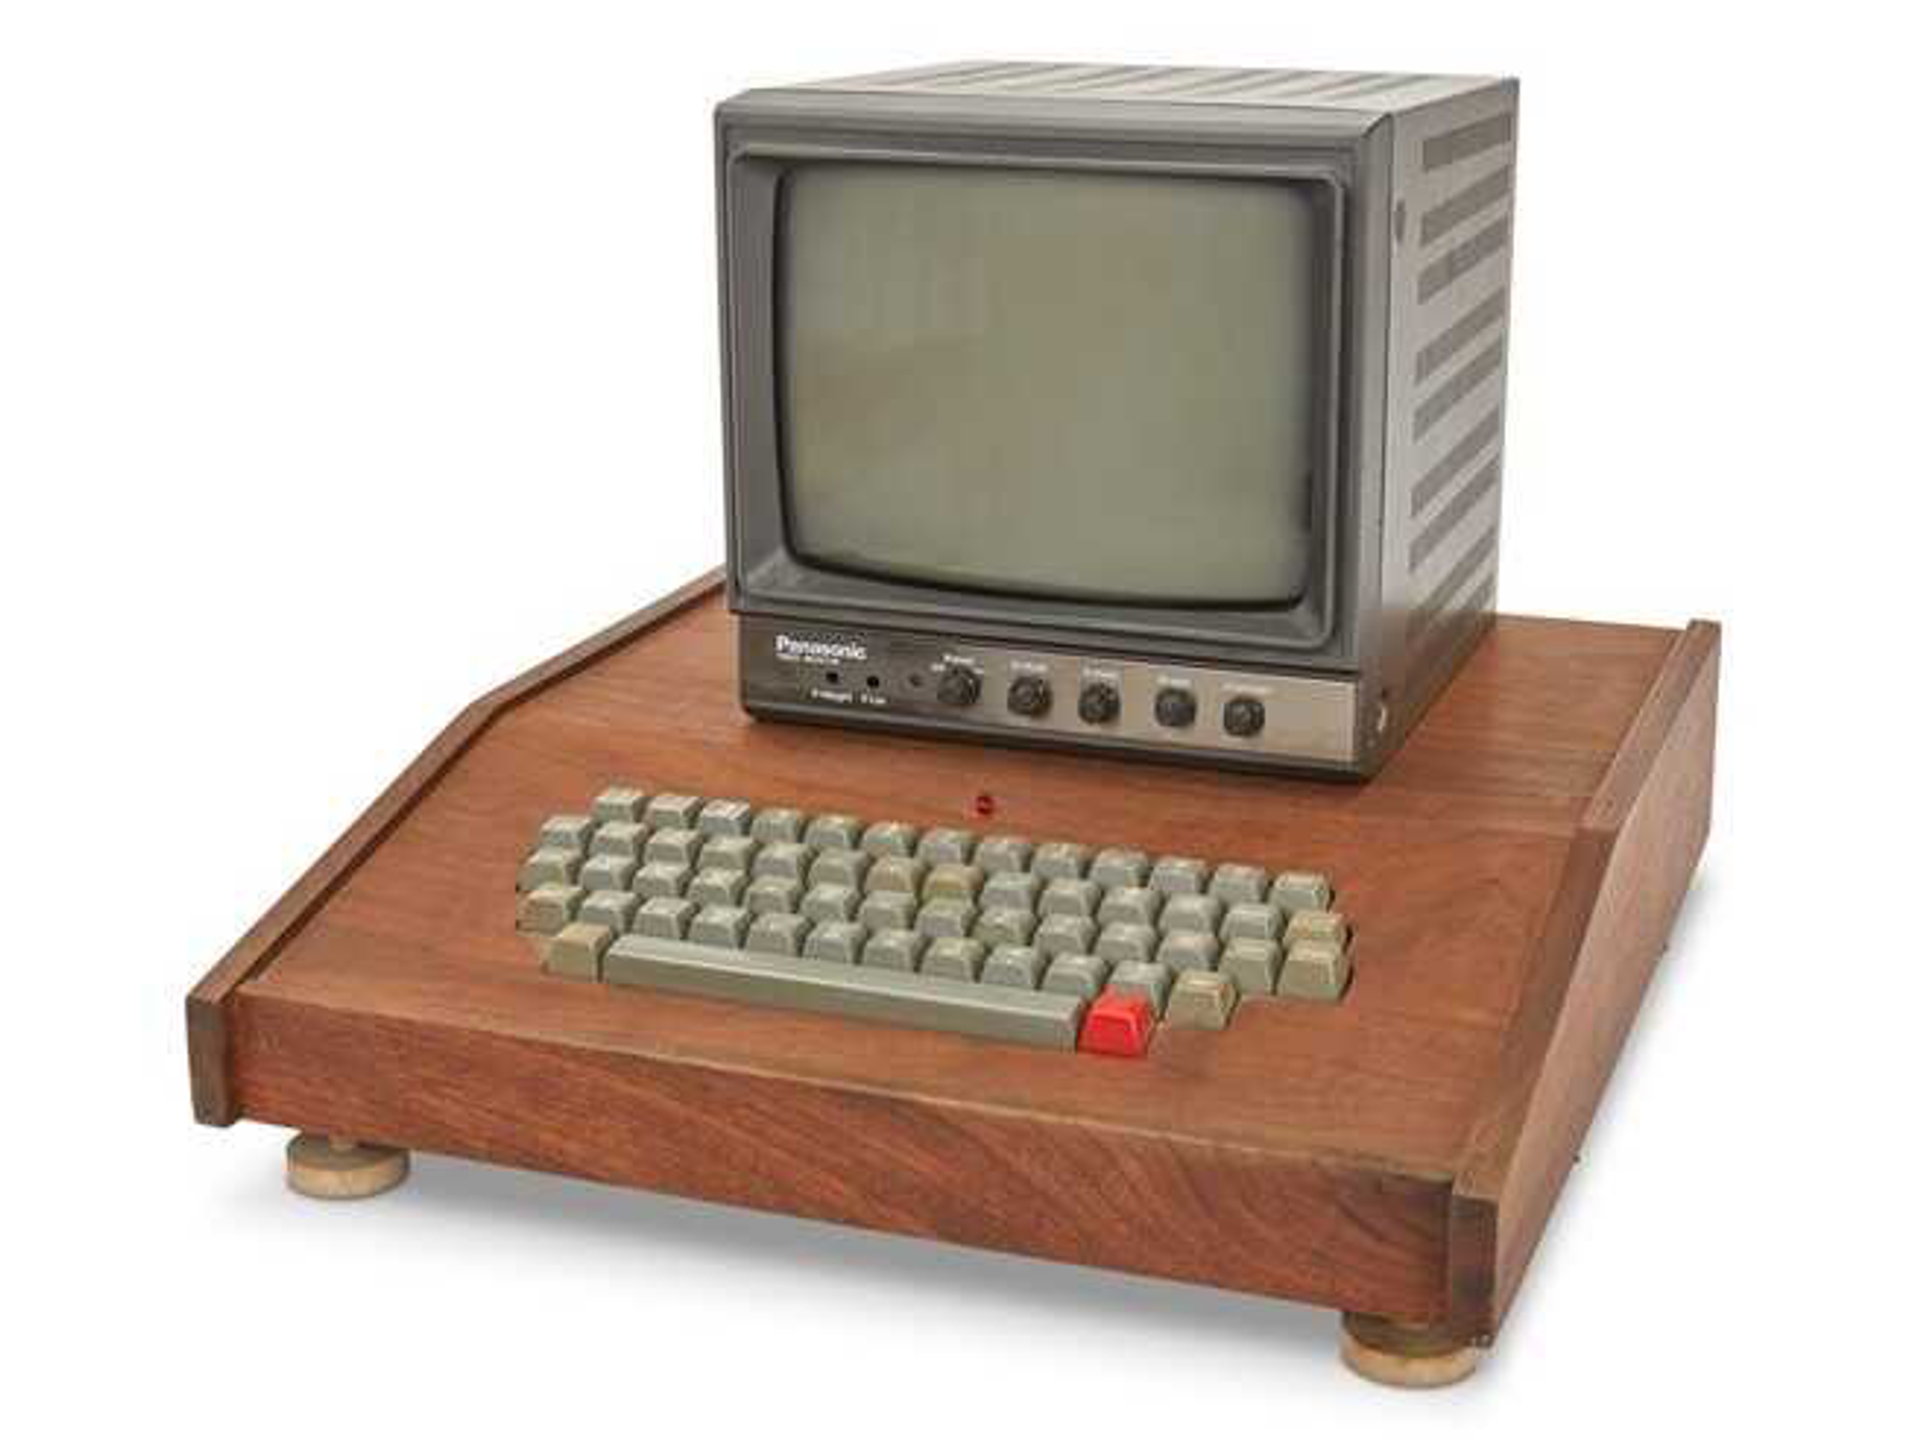 The first Apple computer | Source